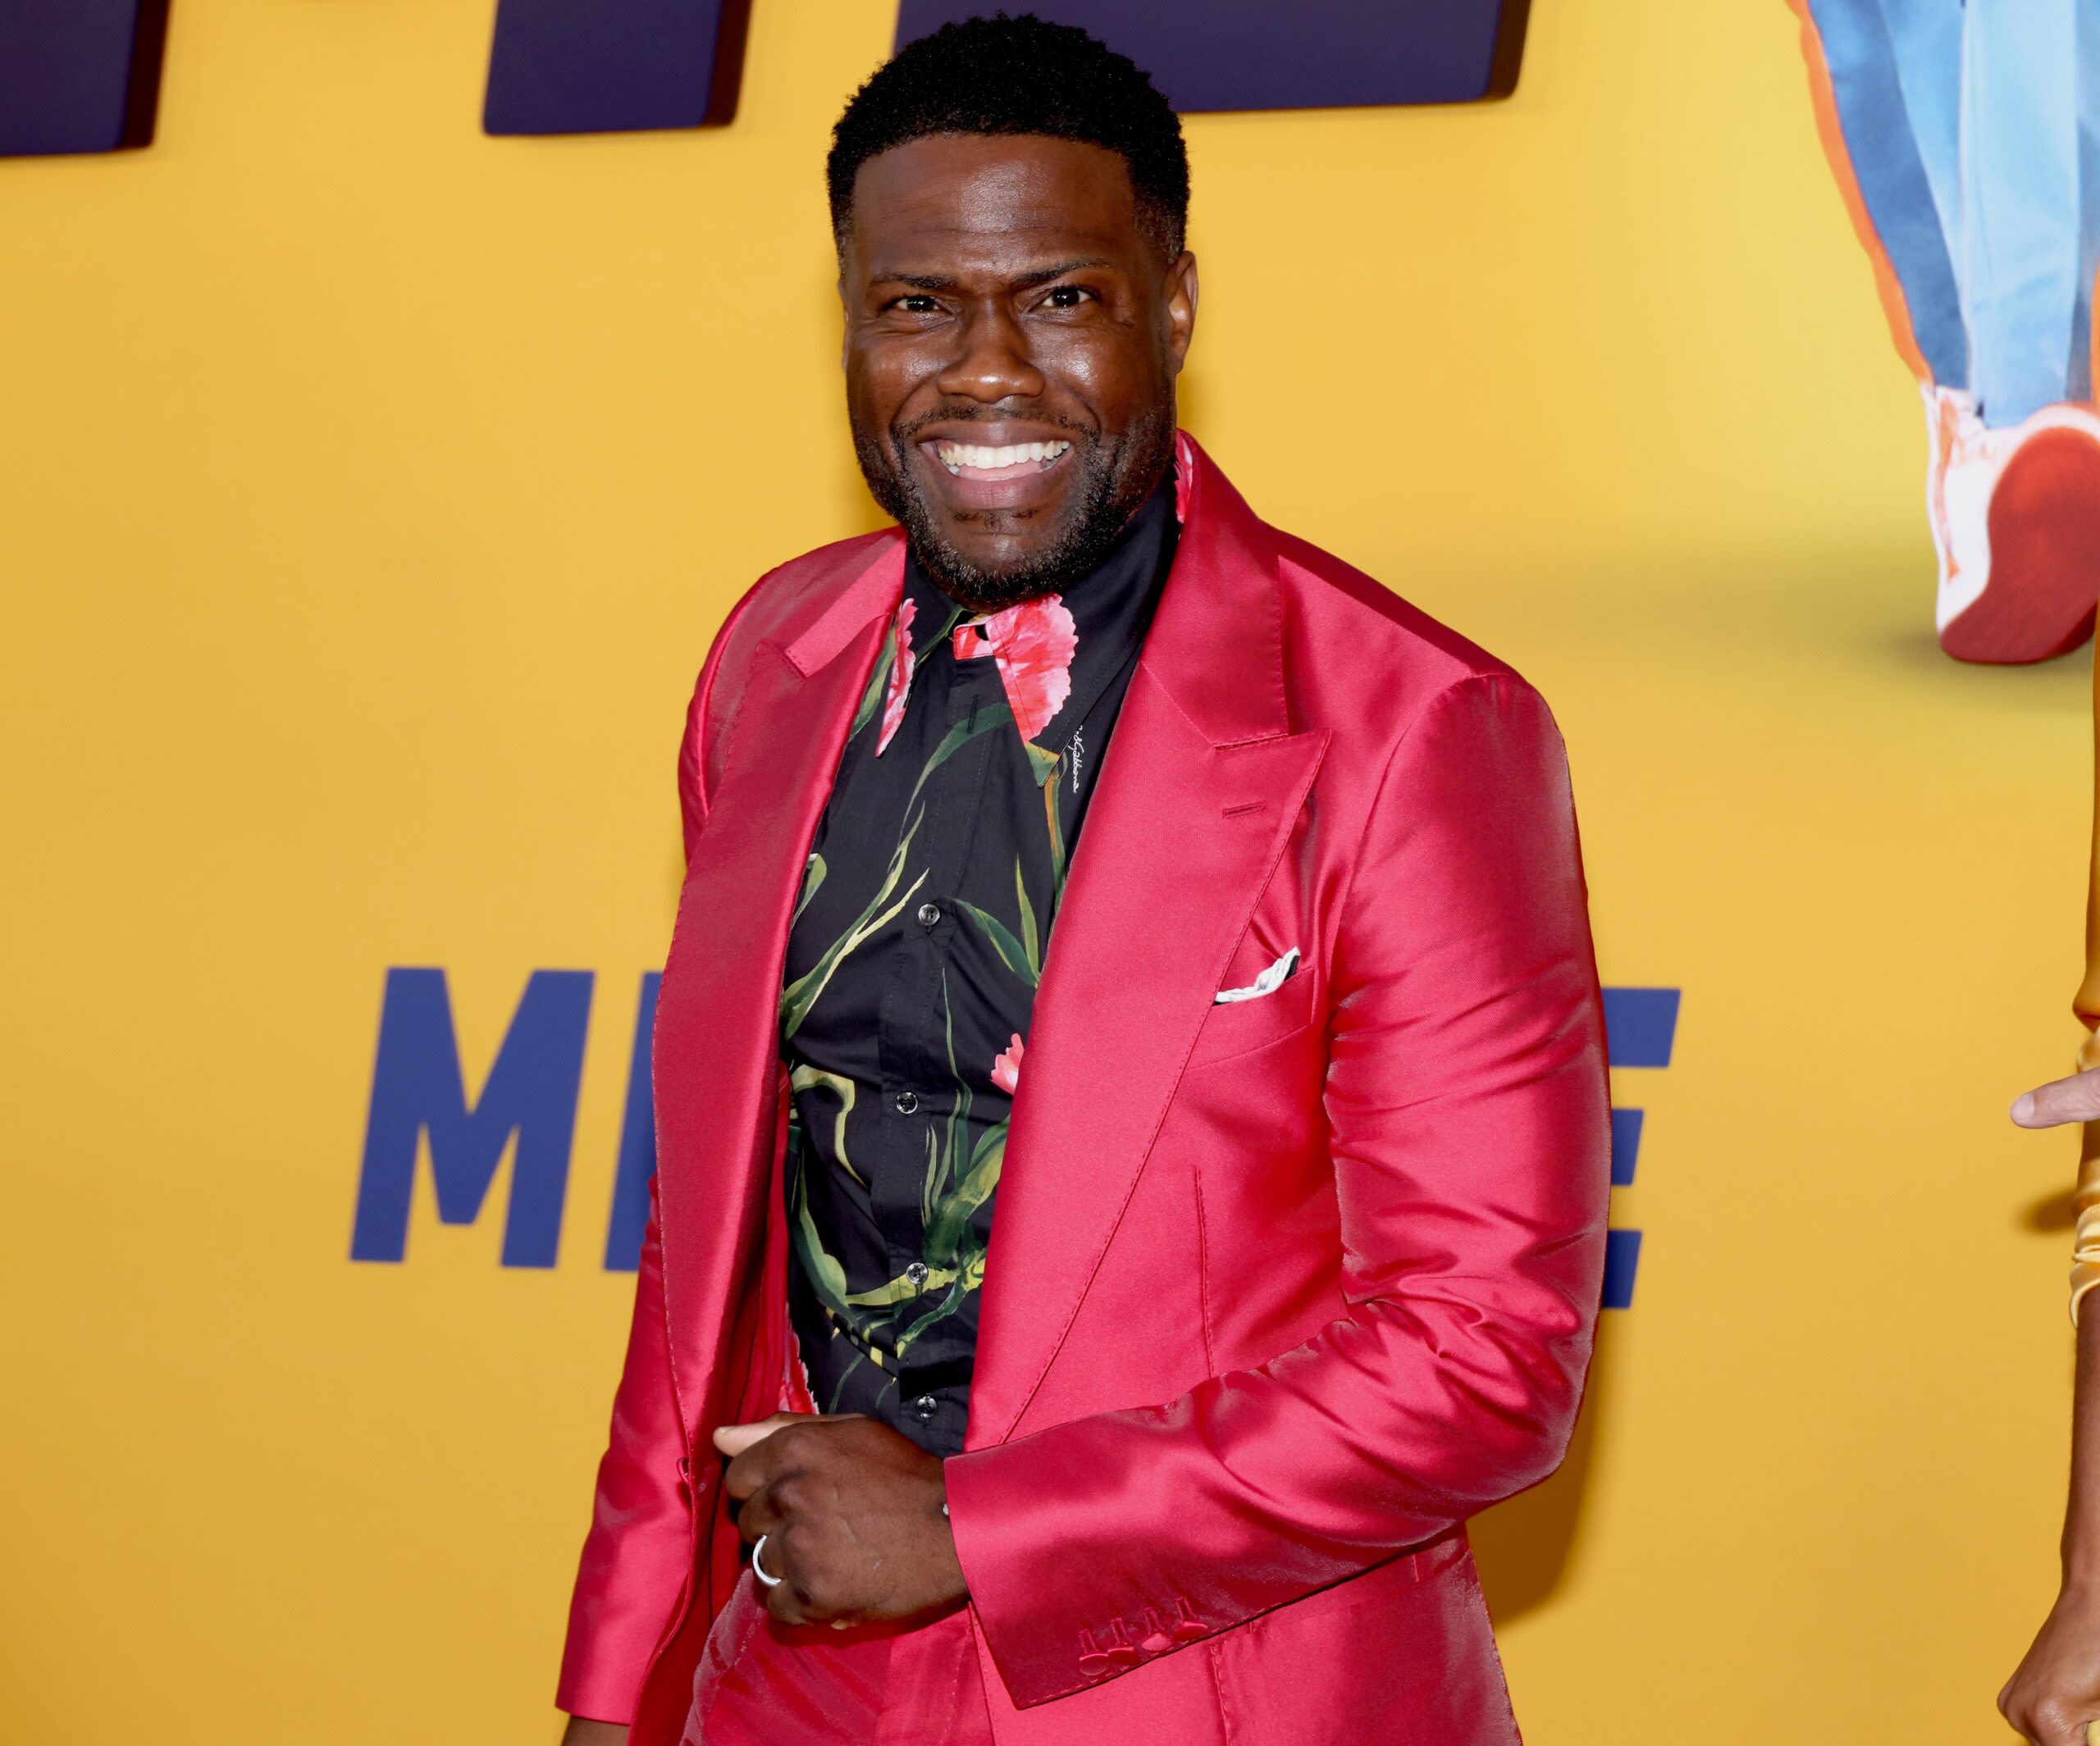 ‘Die Hart 2’ Ending Explained: Will Kevin Hart Return for a Third Installment?